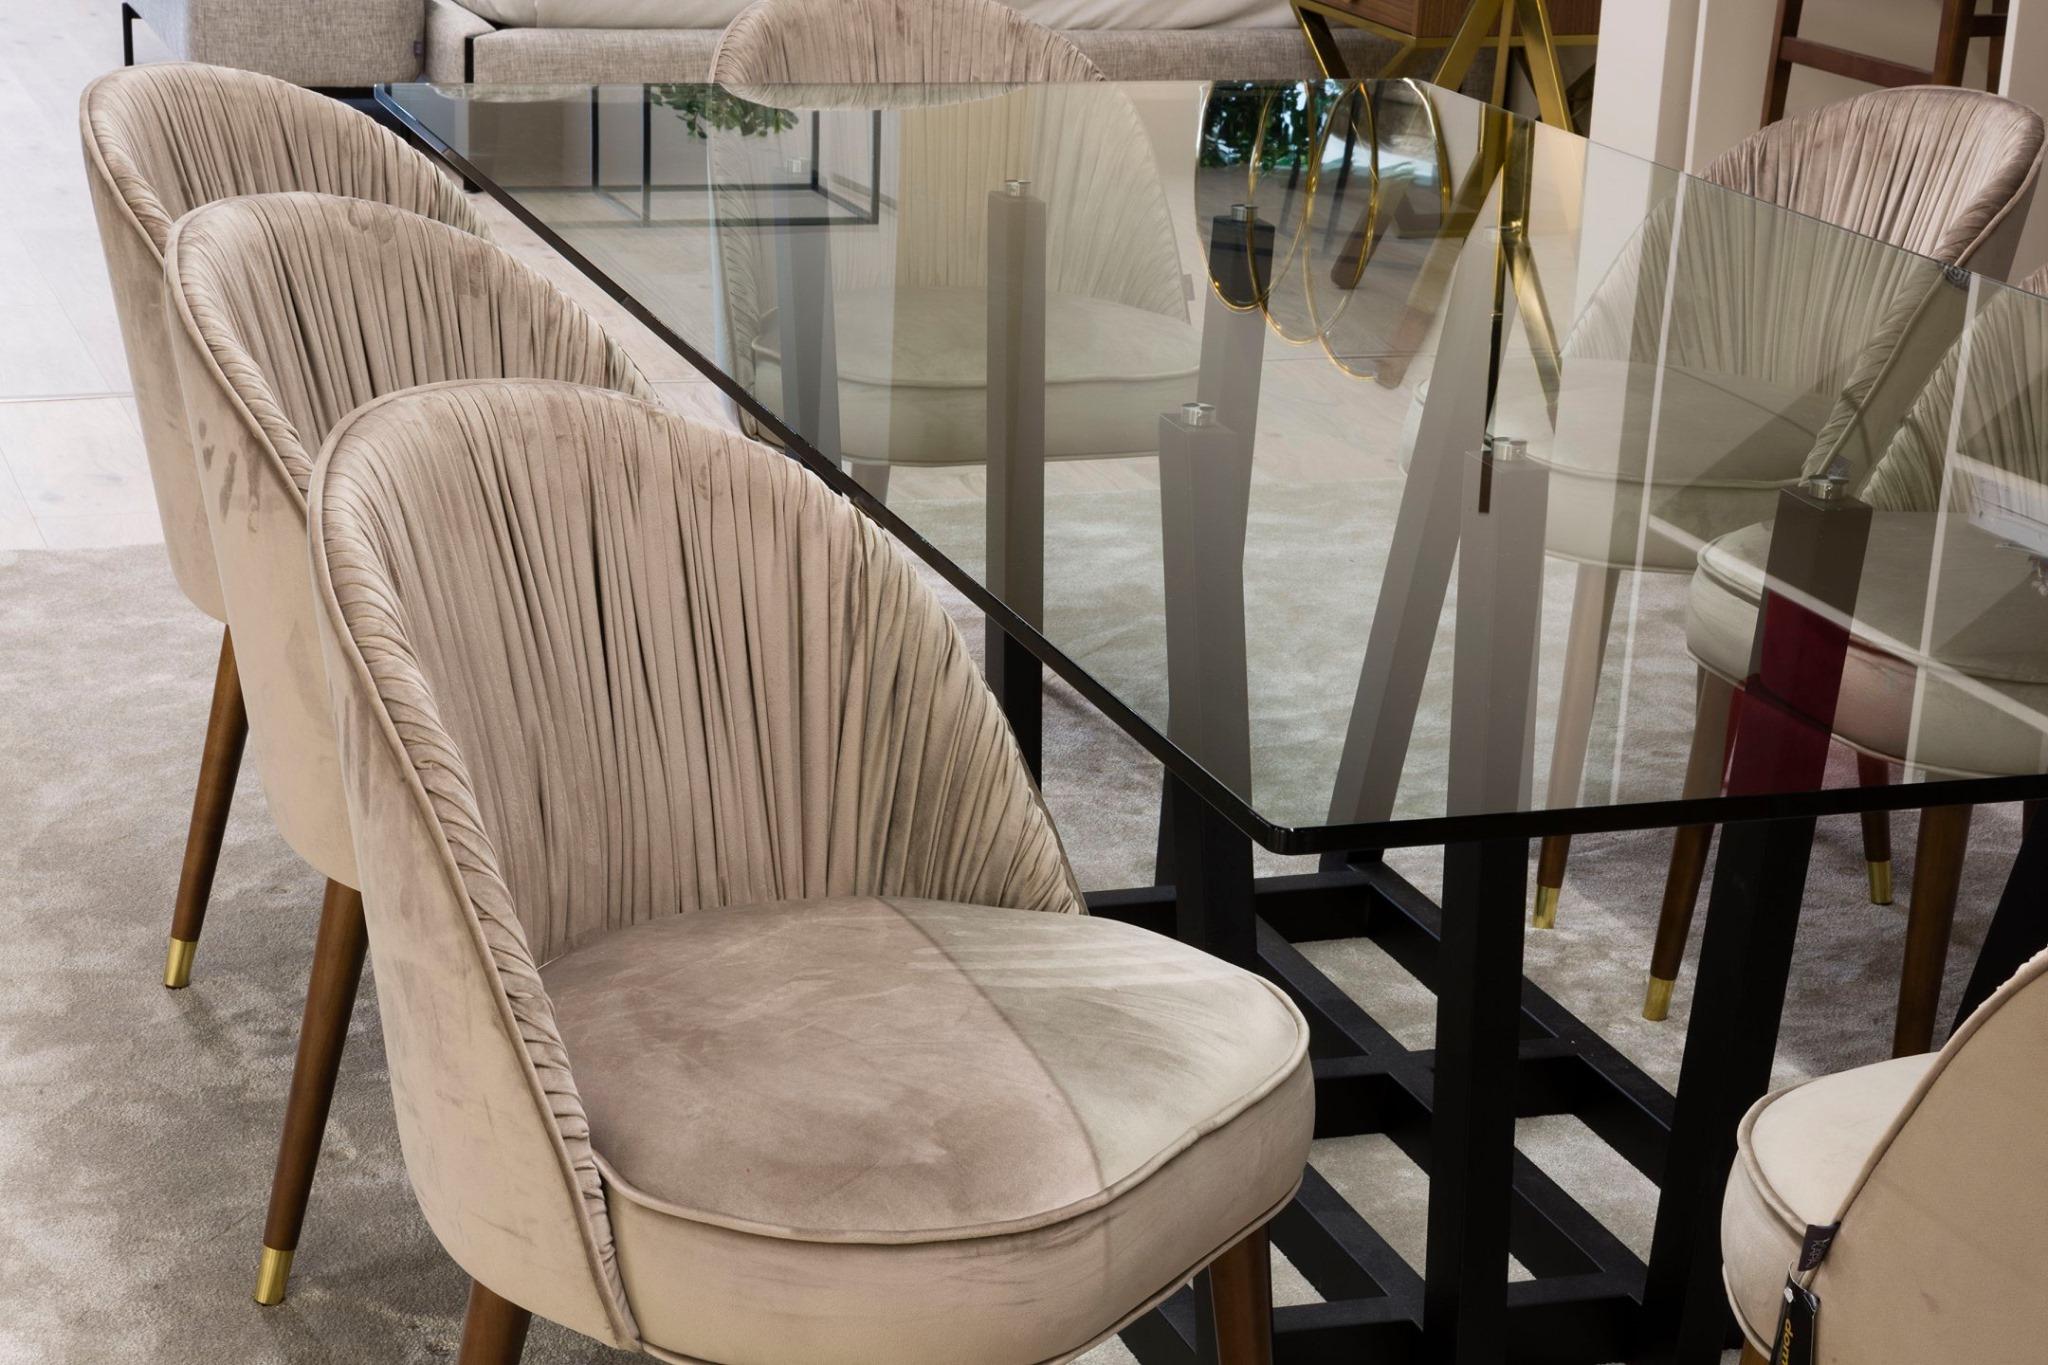 The contemporary dining chair hold a stimulating design, as it holds an elegant combination of handmade couture techniques, wood, and metal. Its water repellent and stain resistant velvet is soft with alpaca wool look and feel.
Curved back featuring